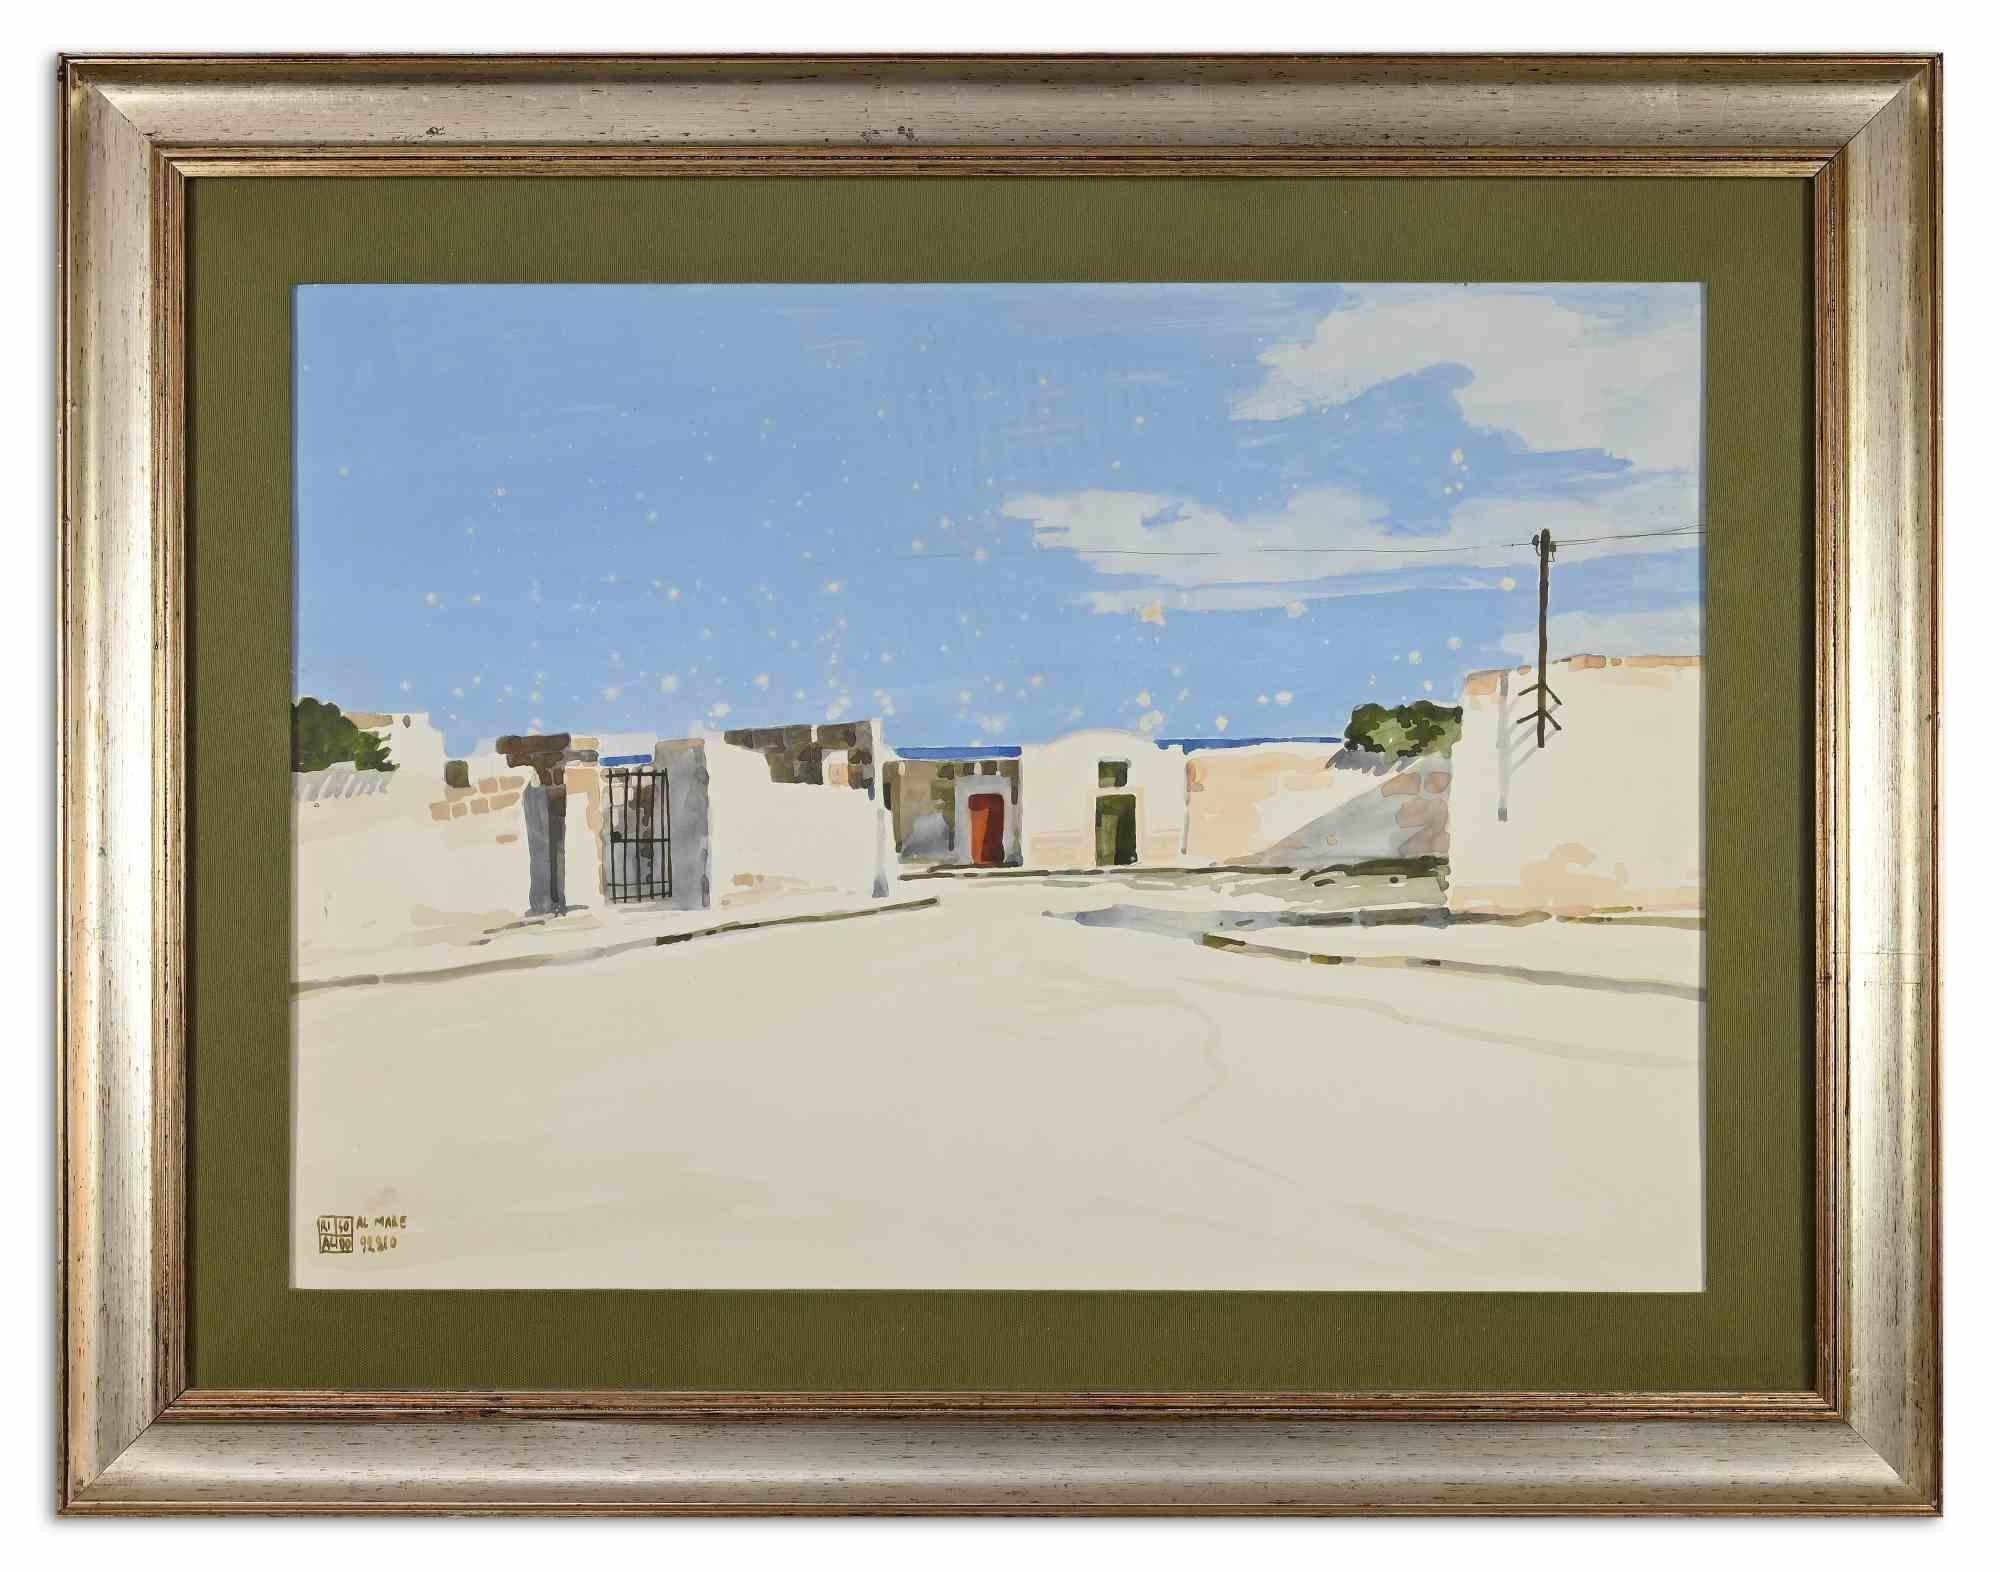 At the beach is an artwork realized by Aldo Riso.

Mixed colored tempera and watercolor painting.

Titled on lower left.

Frame included: 70.5 x 91.5 cm 


This beautiful mixed media painting represents a typical village of Puglia, the Italian